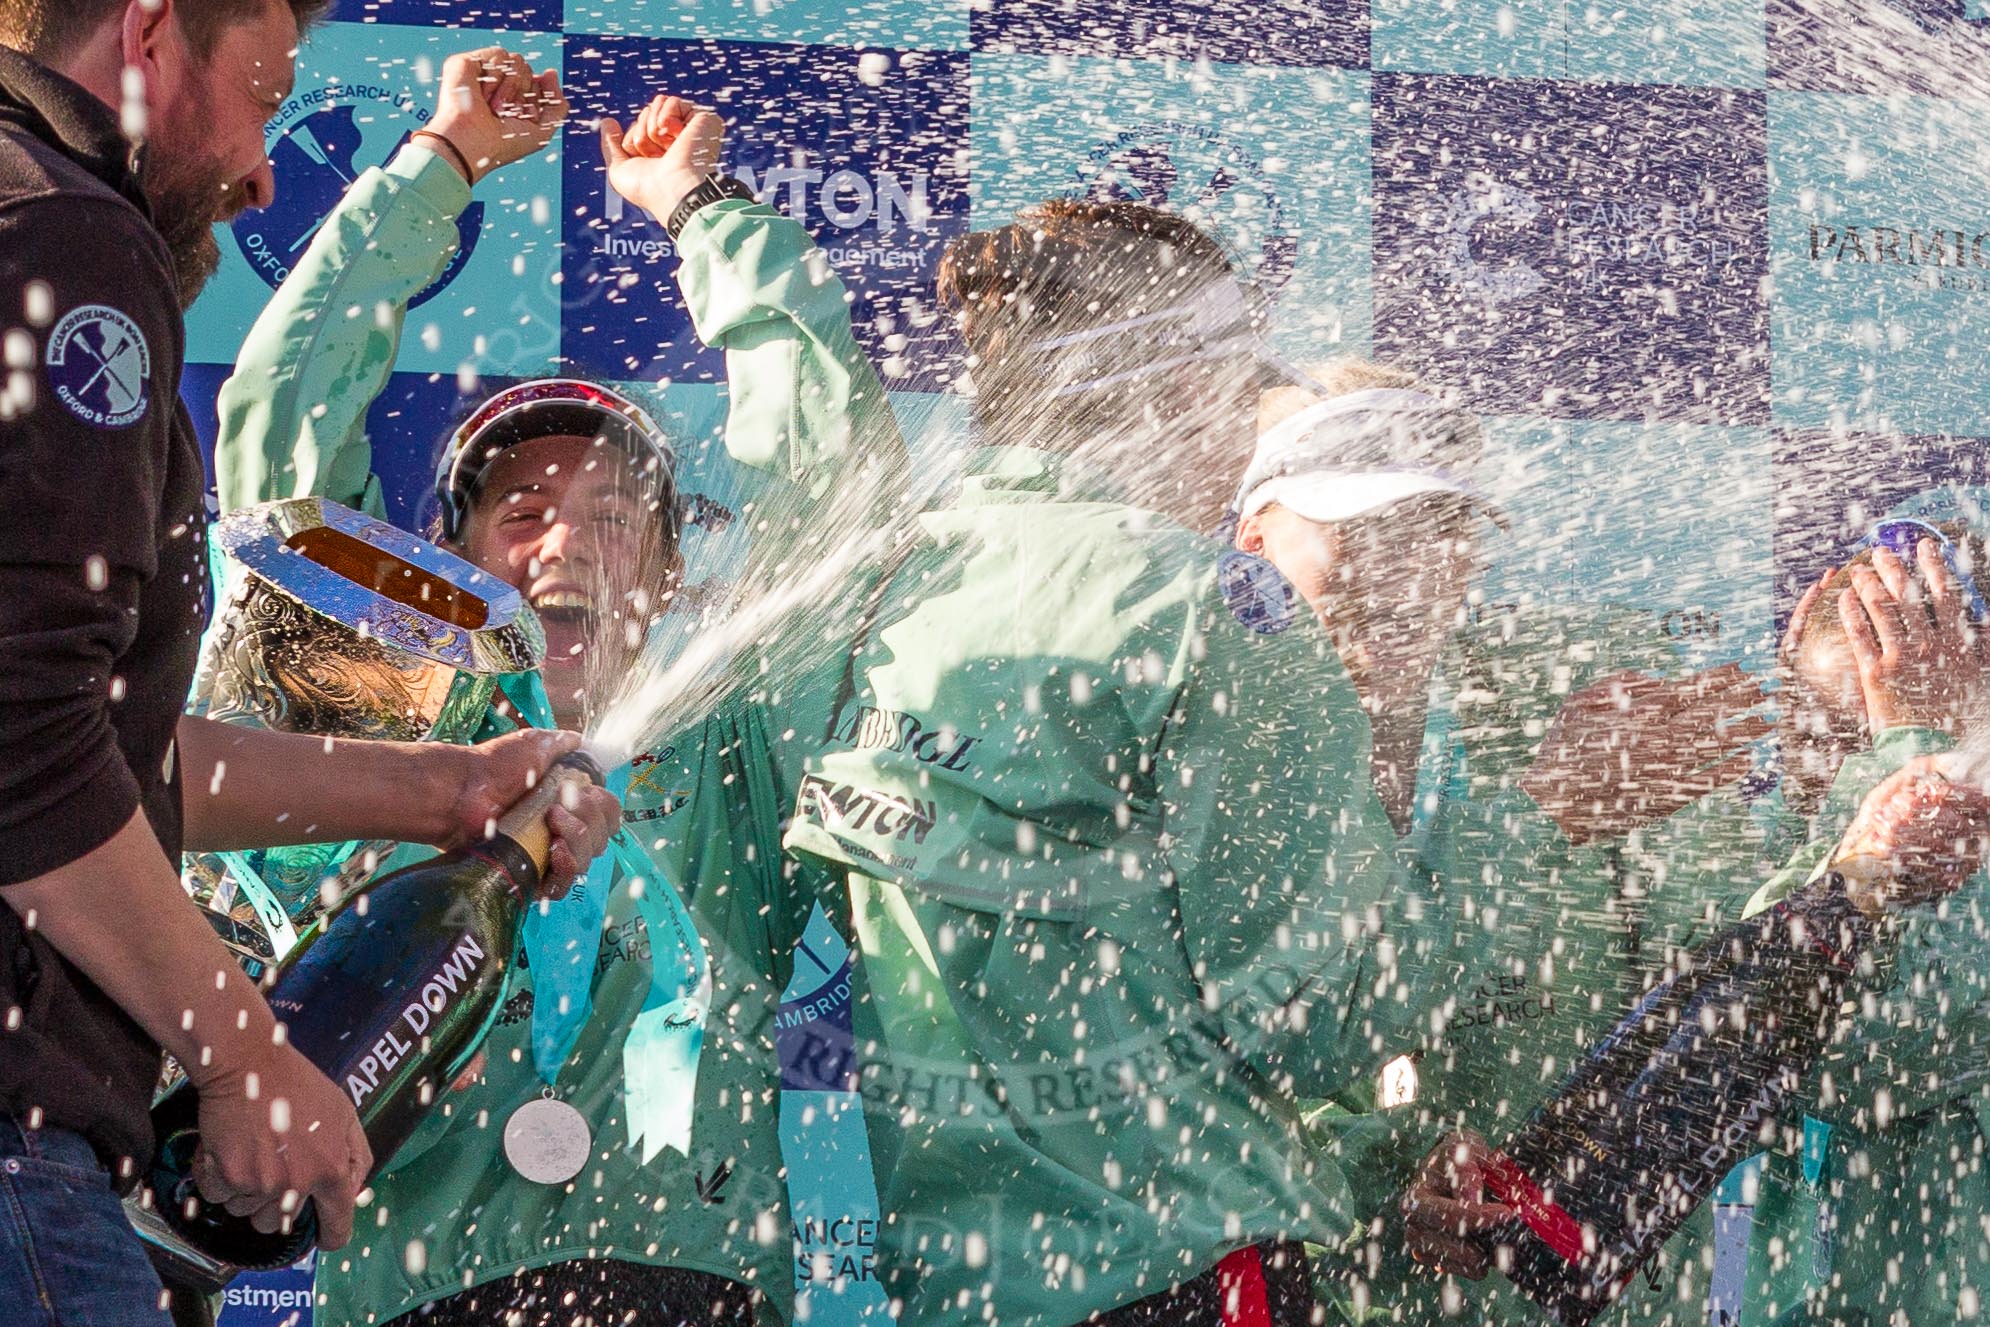 The Boat Race season 2017 -  The Cancer Research Women's Boat Race: CUWBC head coach Rob Barker spraying Champagne at the crew, on his right cox Matthew Holland.
River Thames between Putney Bridge and Mortlake,
London SW15,

United Kingdom,
on 02 April 2017 at 17:13, image #264